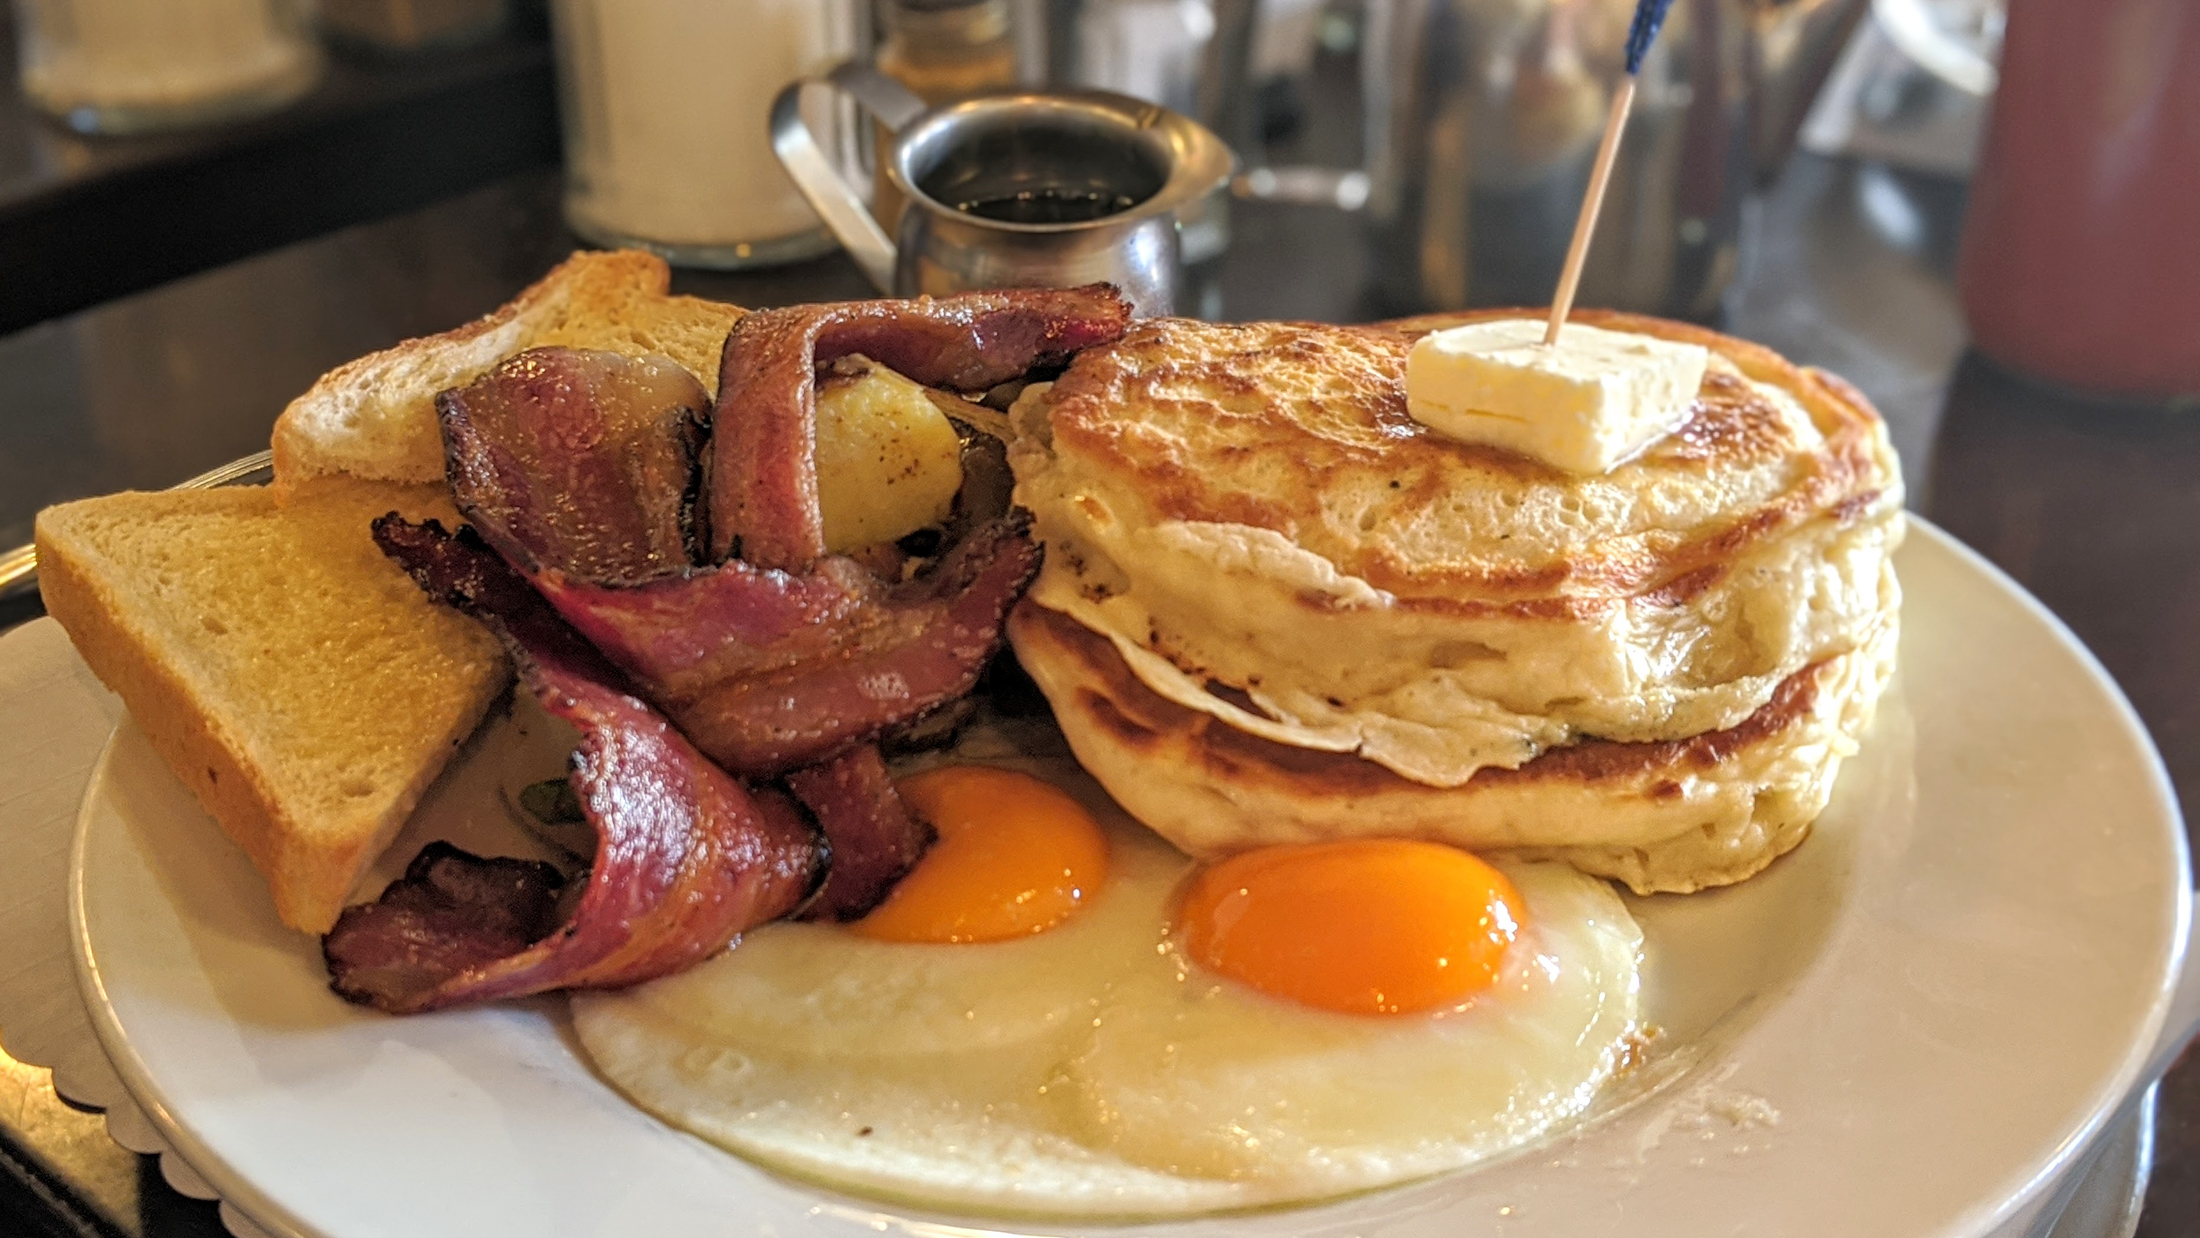 Our Guide to the 14 Tastiest Brunch Spots in Vancouver (and Some Serve